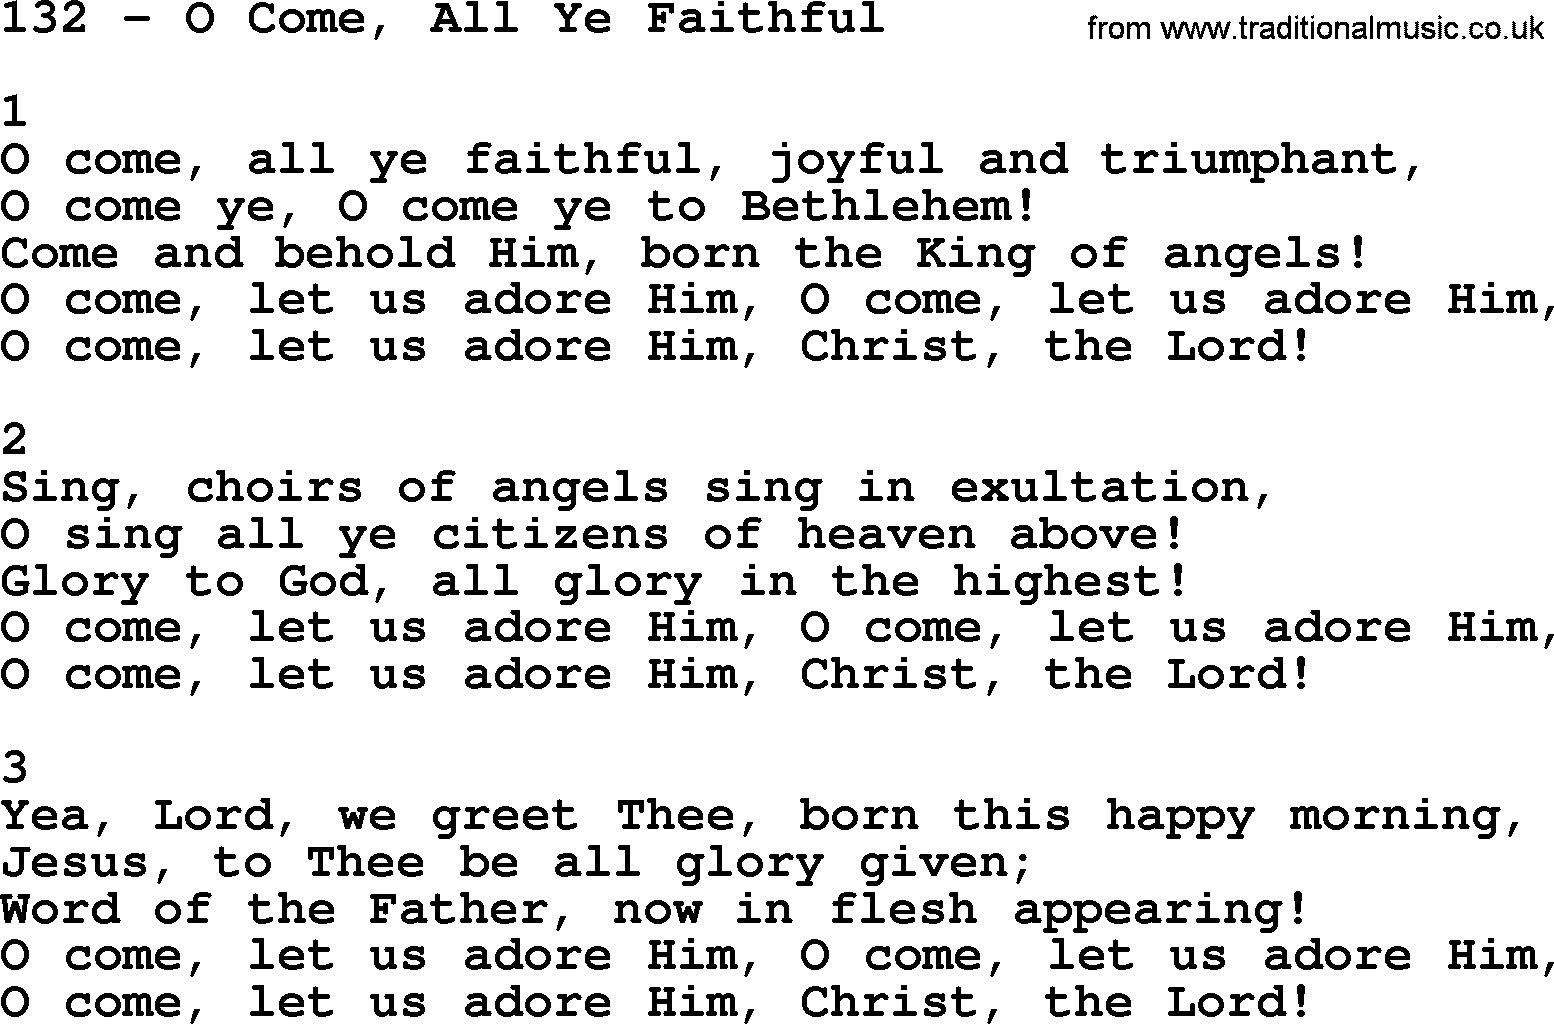 Complete Adventis Hymnal, title: 132-O Come, All Ye Faithful, with lyrics, midi, mp3, powerpoints(PPT) and PDF,